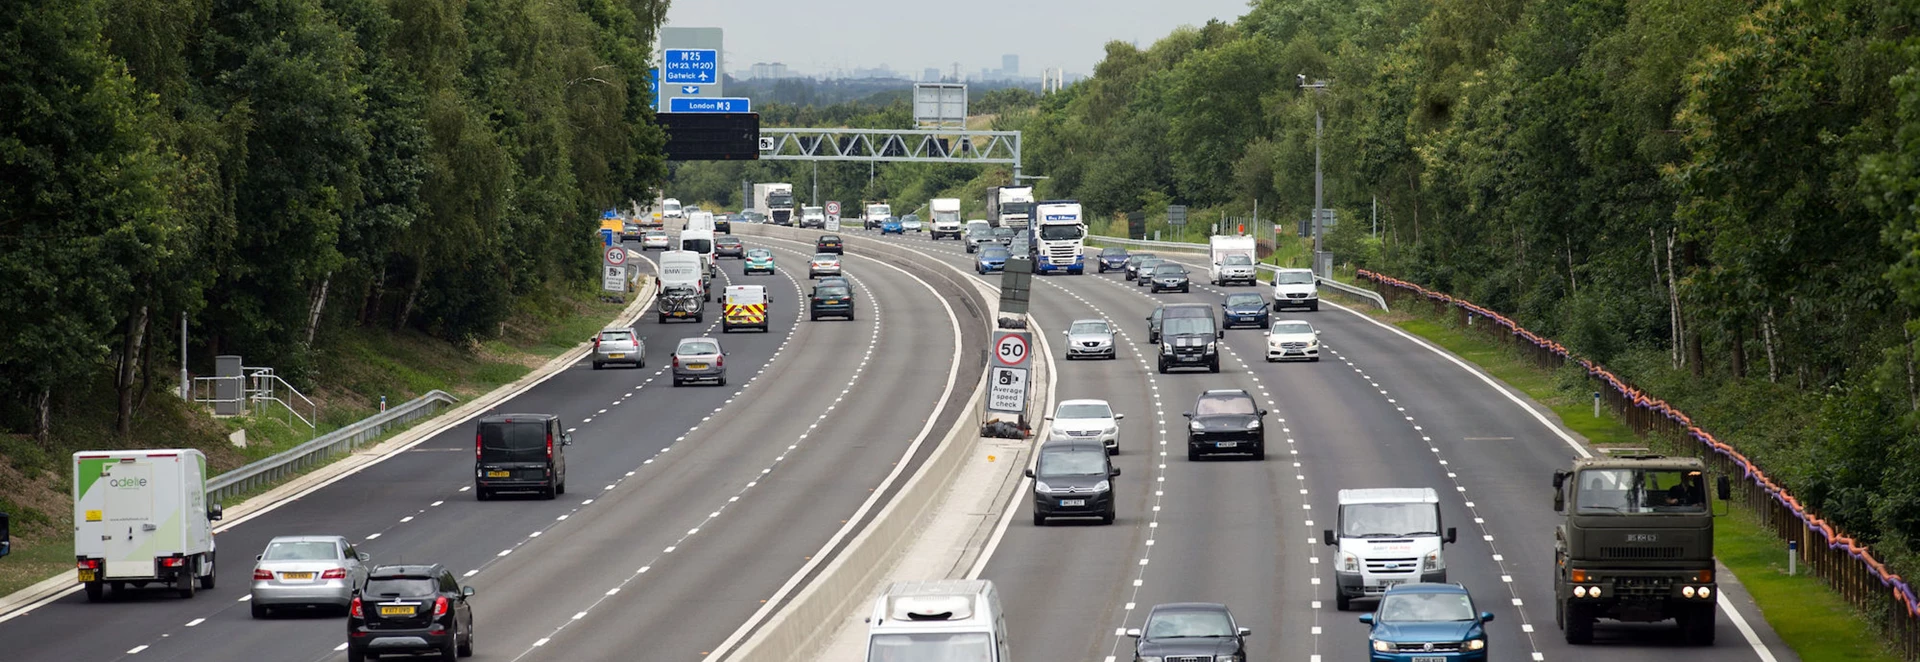 Driving laws on motorways are set to change in spring 2018